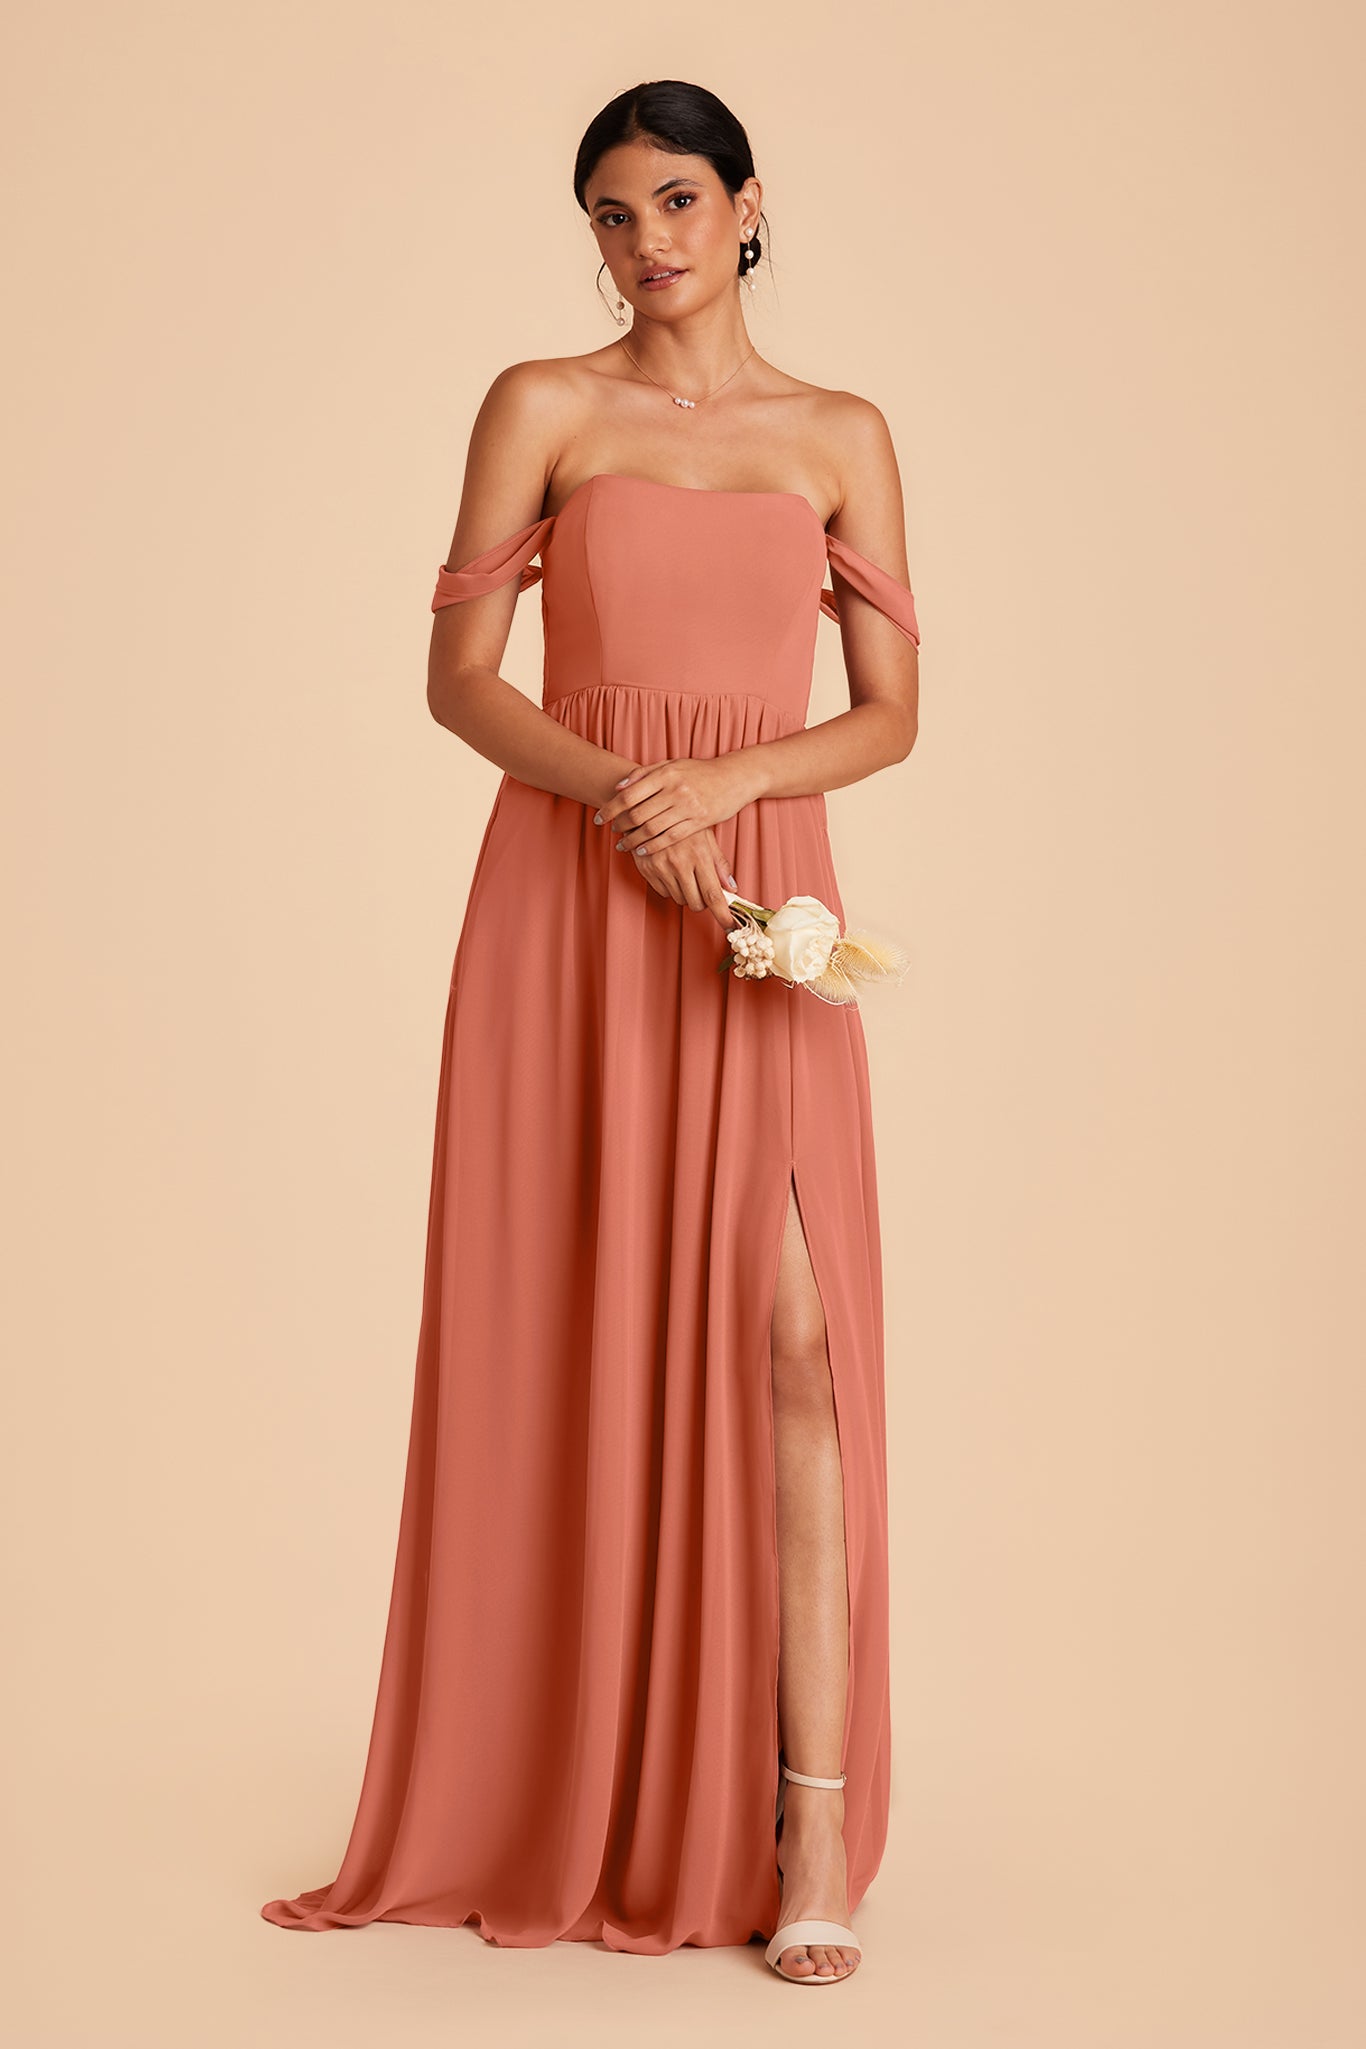 August bridesmaid dress with slit in terracotta chiffon by Birdy Grey, front view